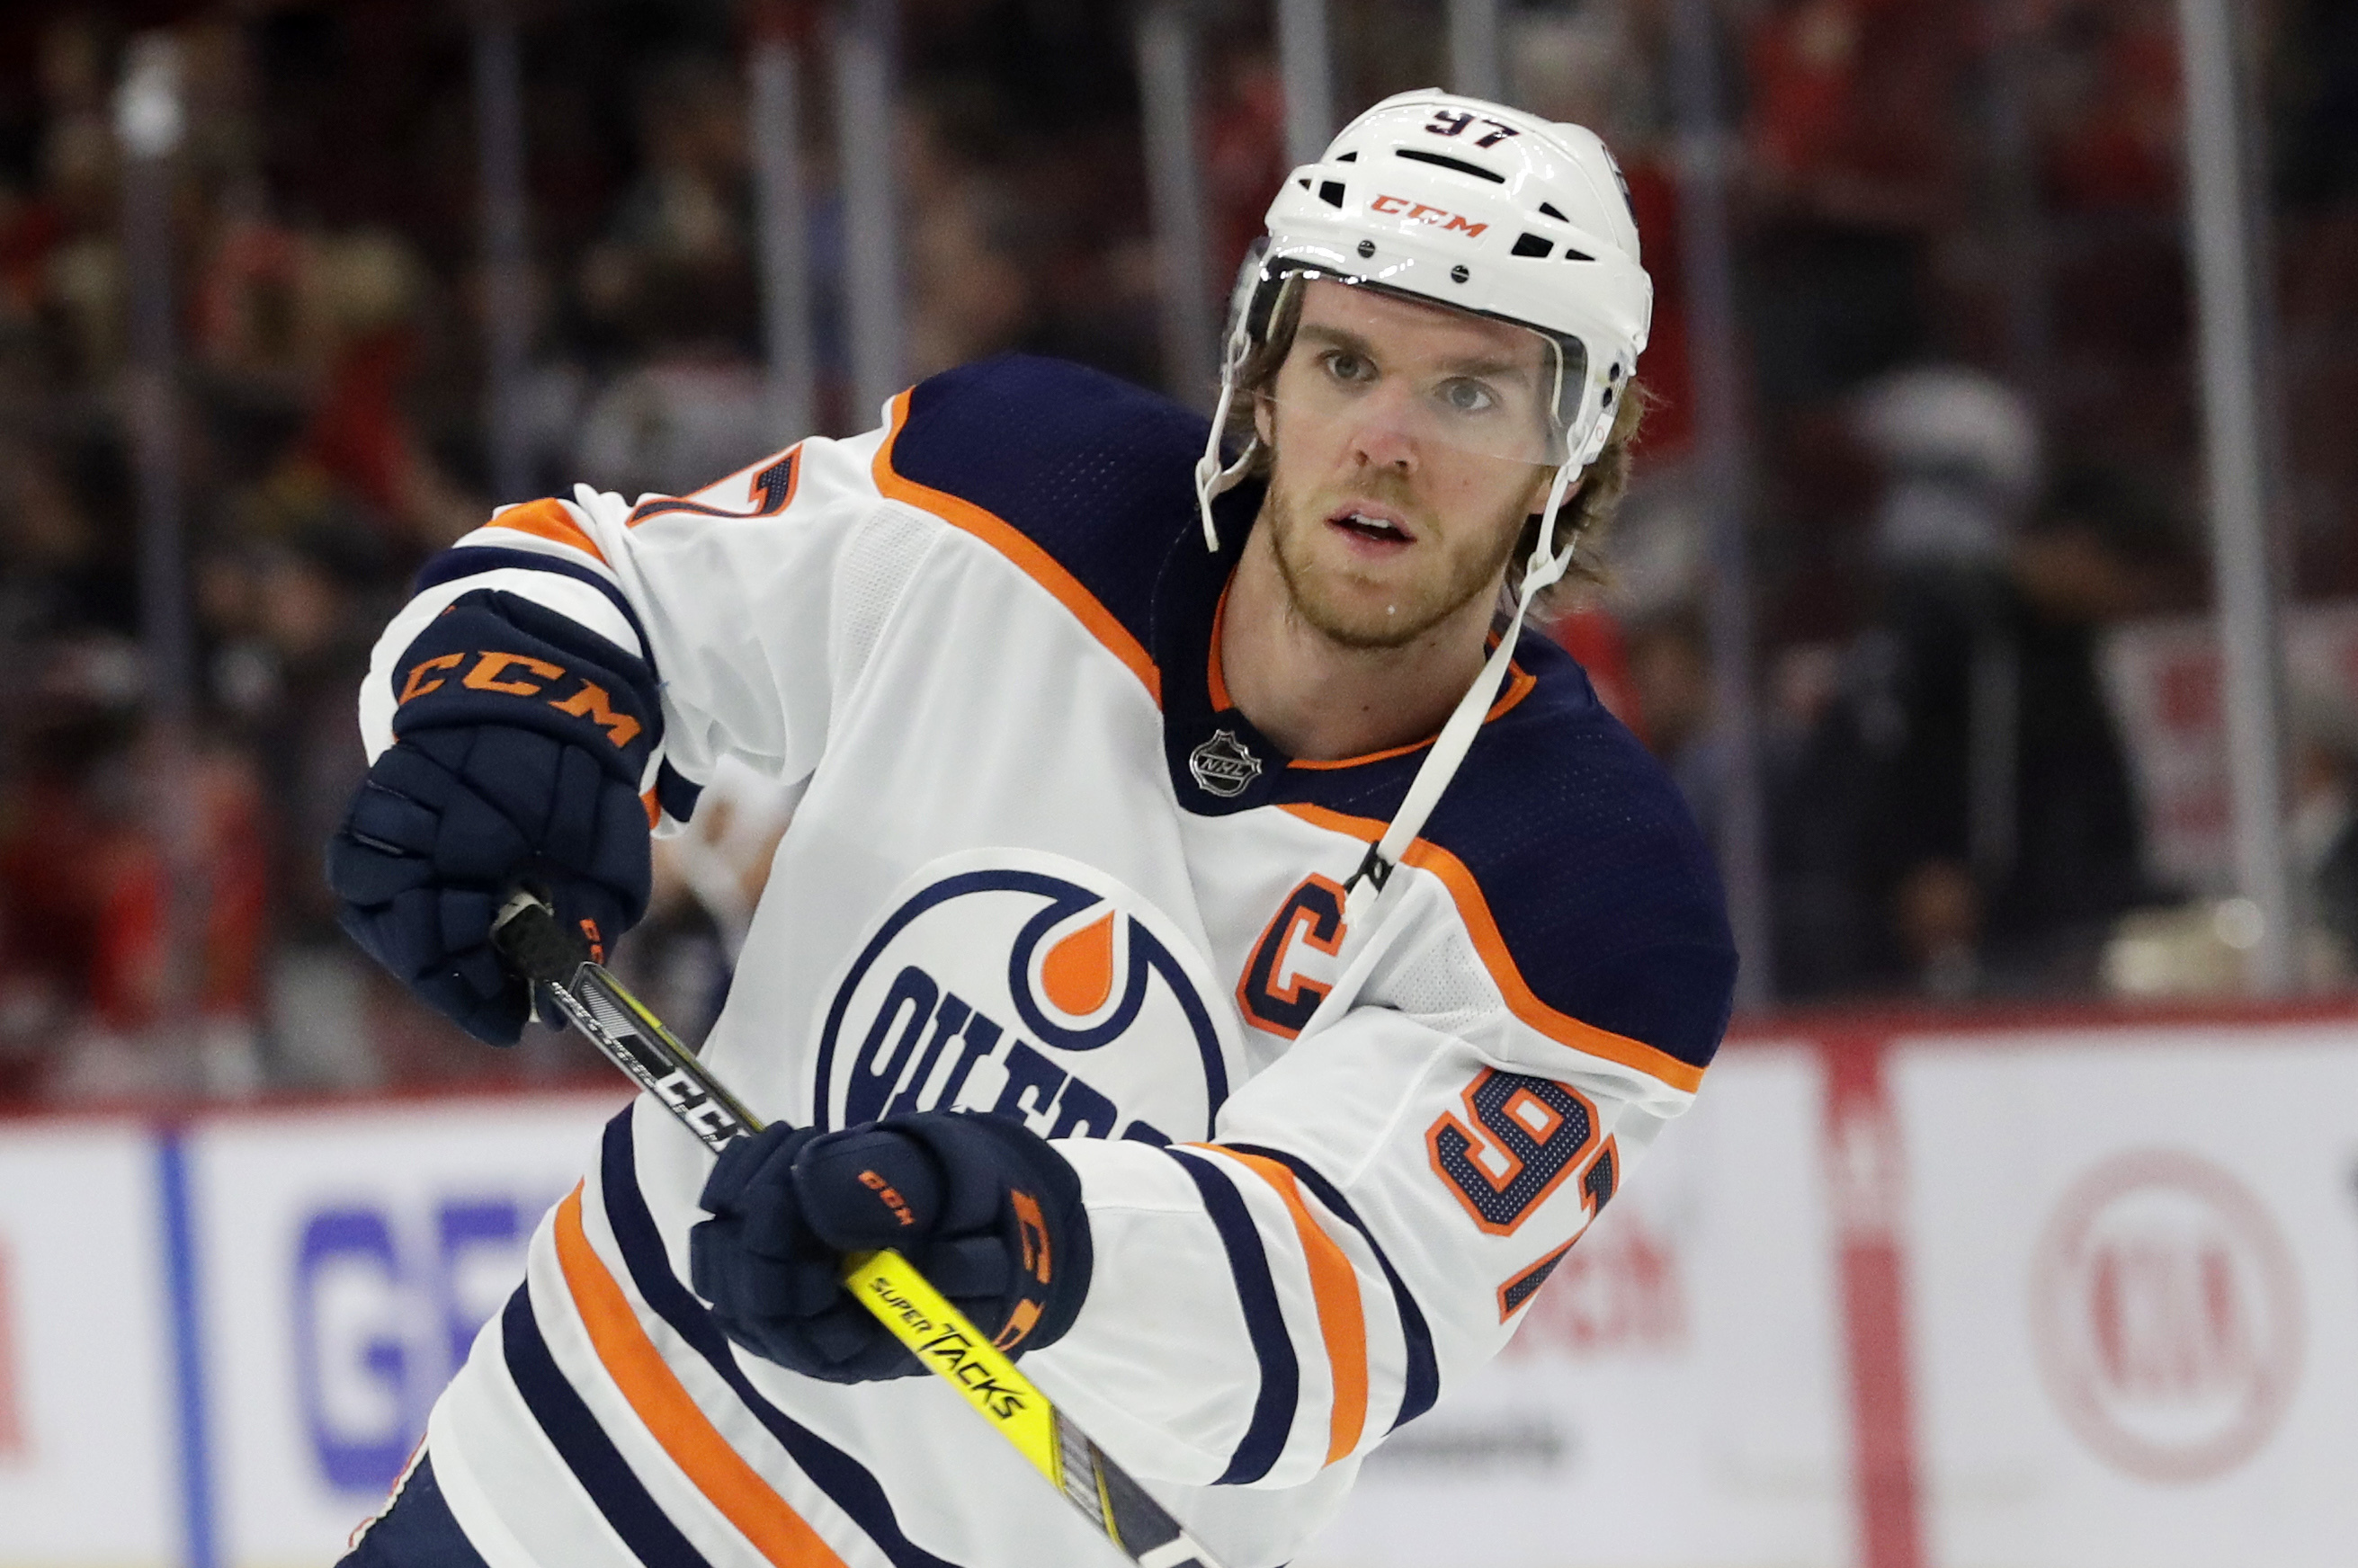 Connor McDavid rookie card sells for record $55,655 in online auction